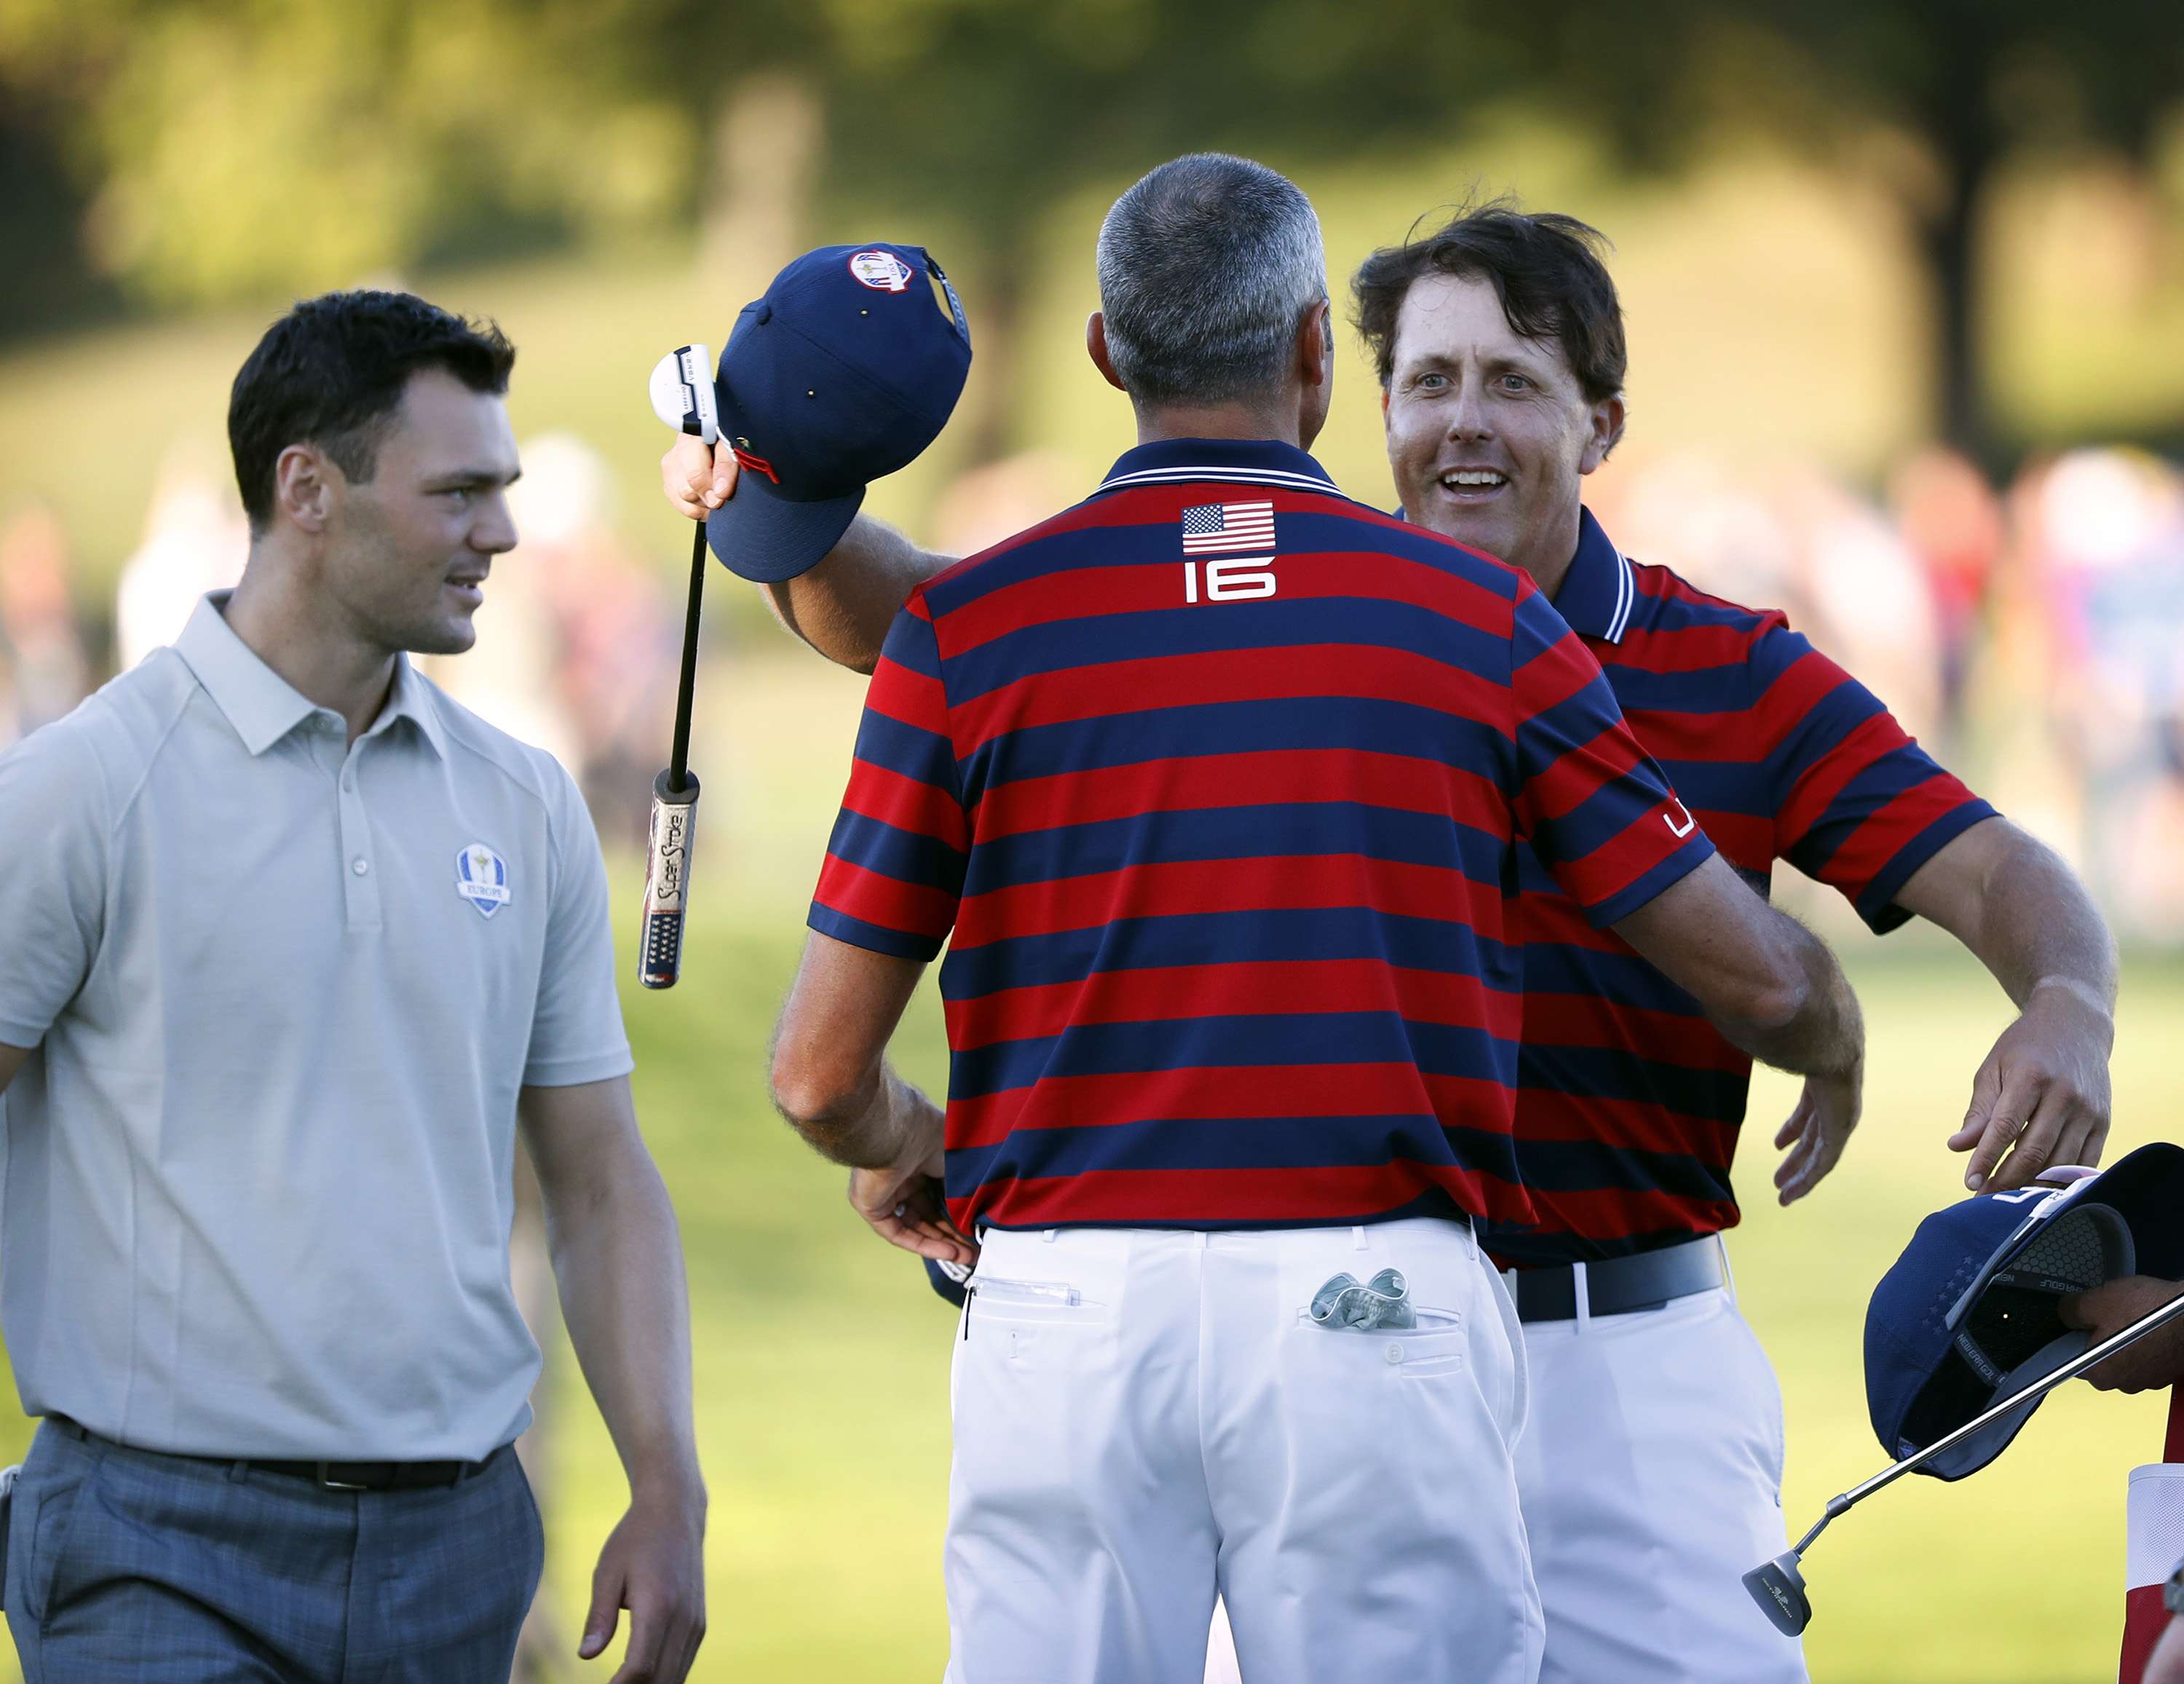 Phil Mickelson celebrates his putt at 17 as the US take a grip on the 2016 Ryder Cup. Photo: TNS